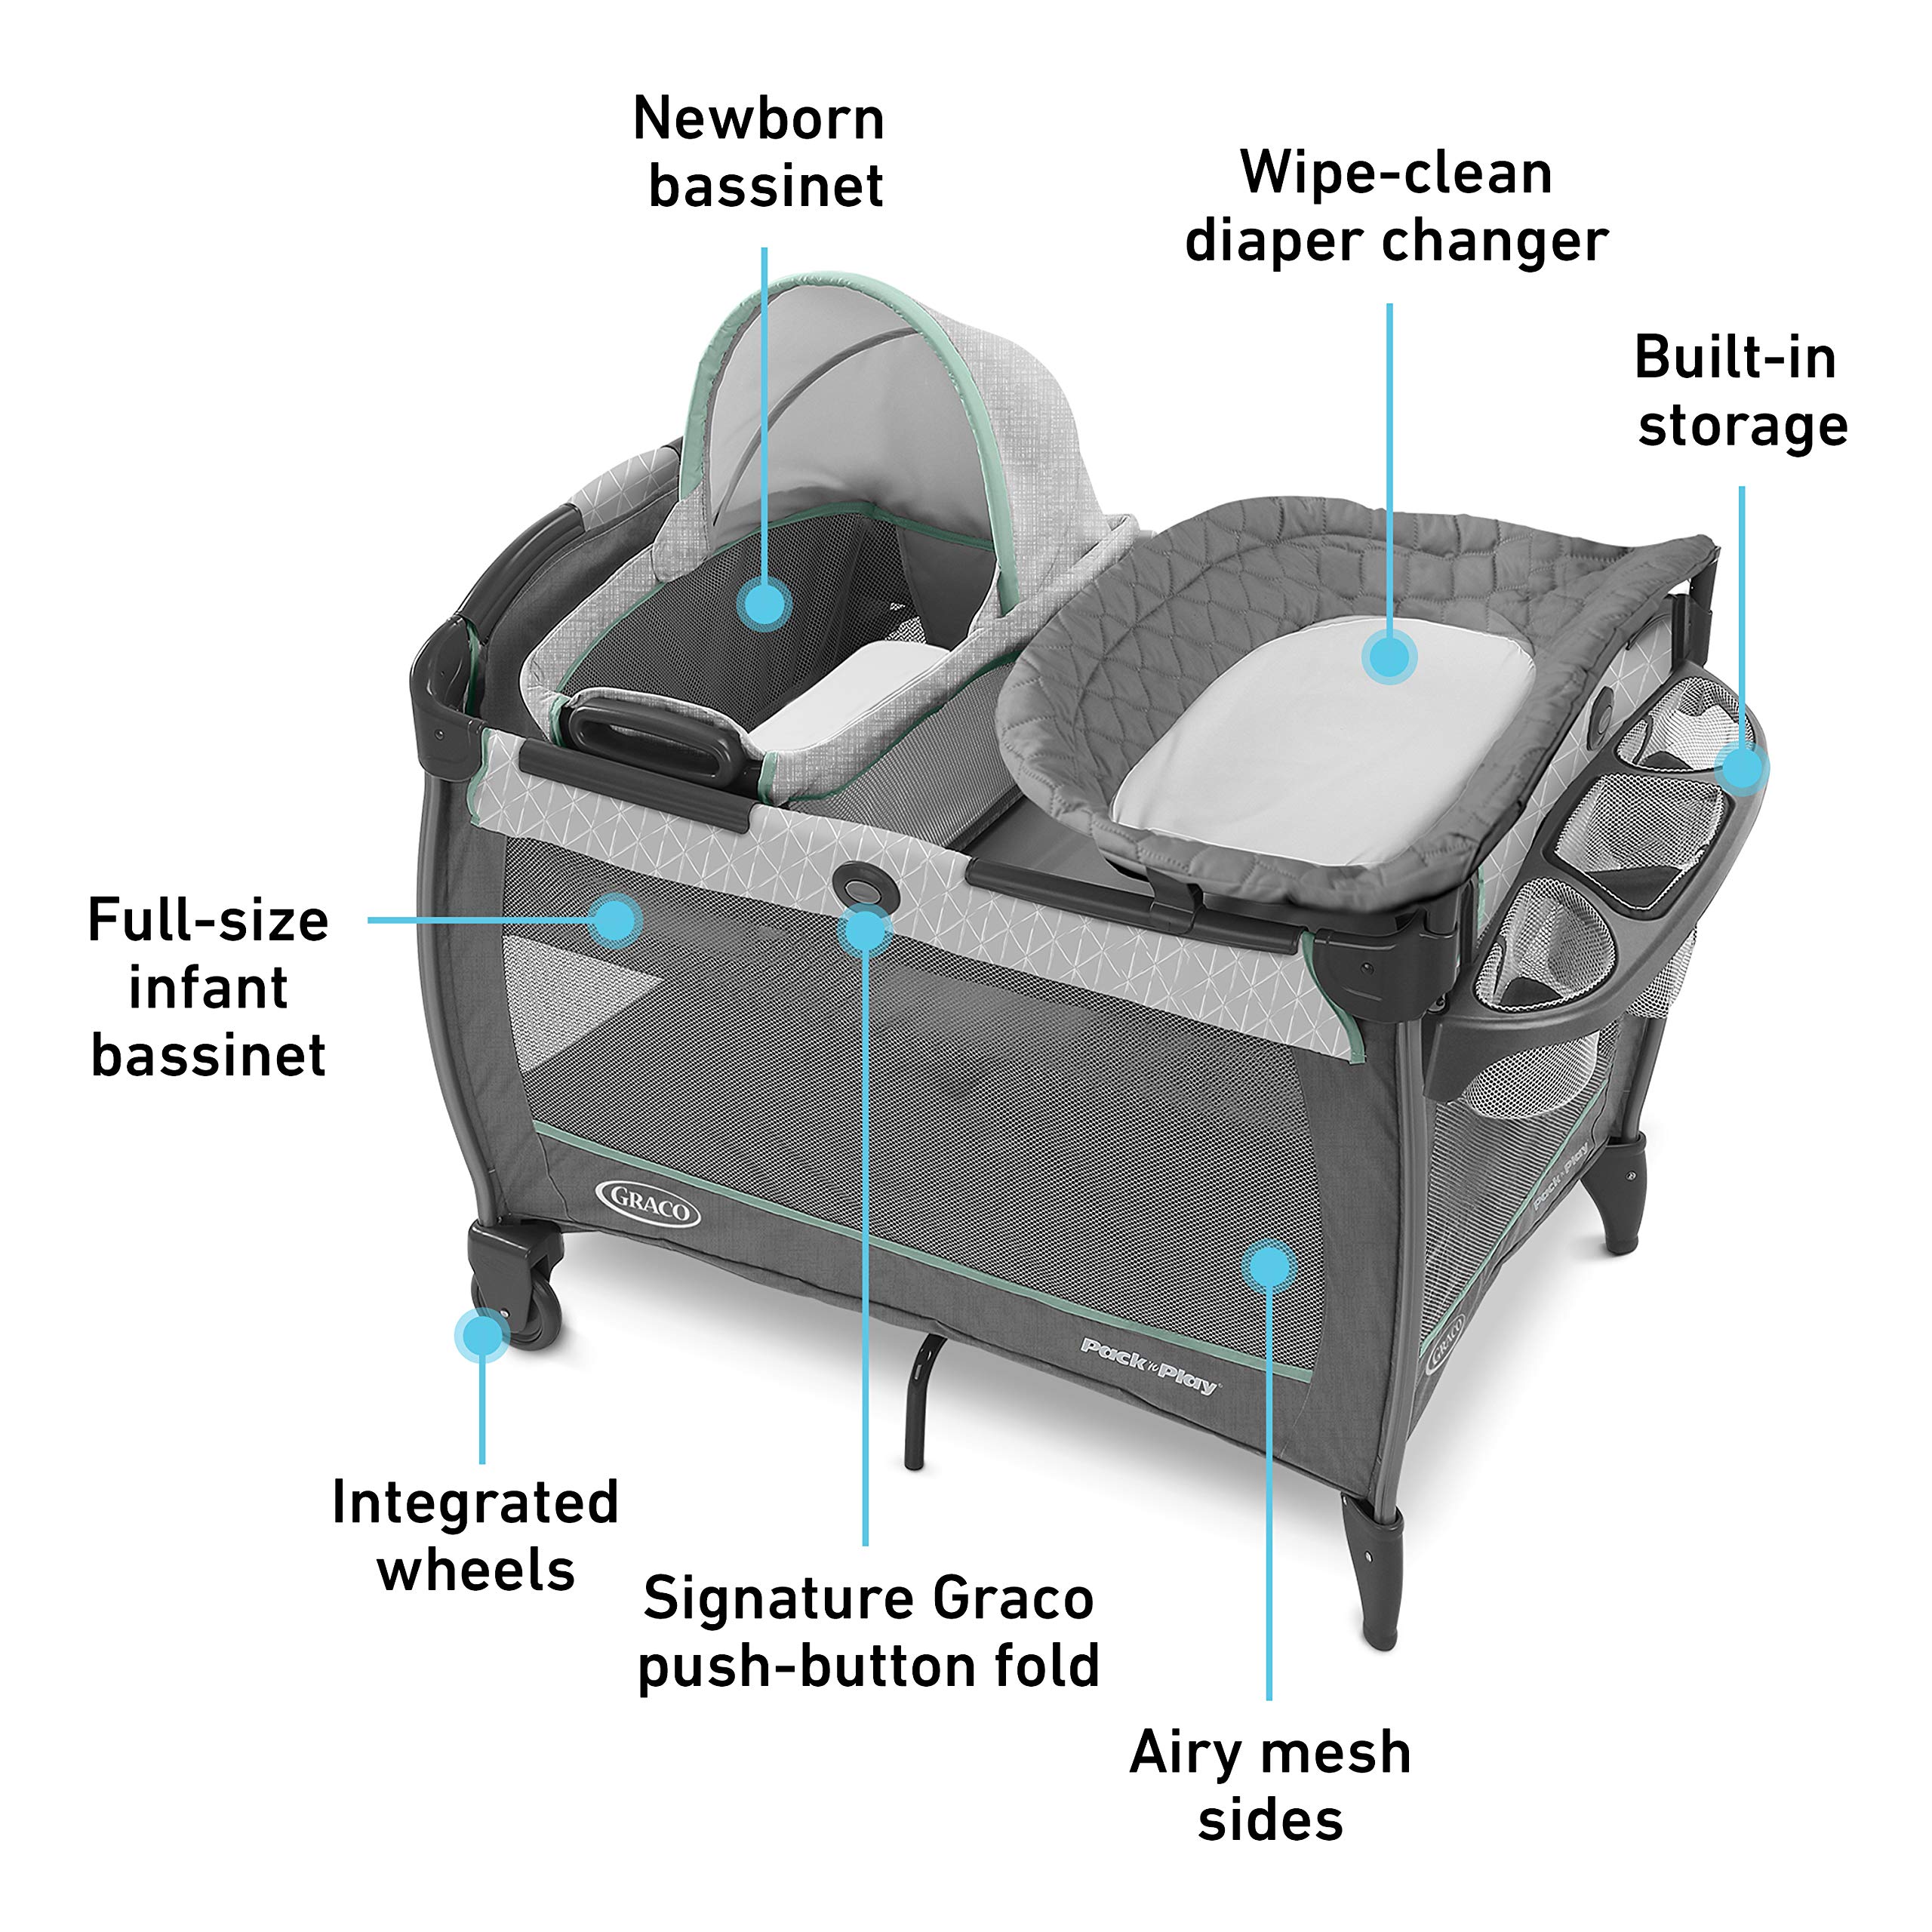 Graco Pack 'n Play Close2Baby Bassinet Playard Features Portable Bassinet Diaper Changer and More, Derby